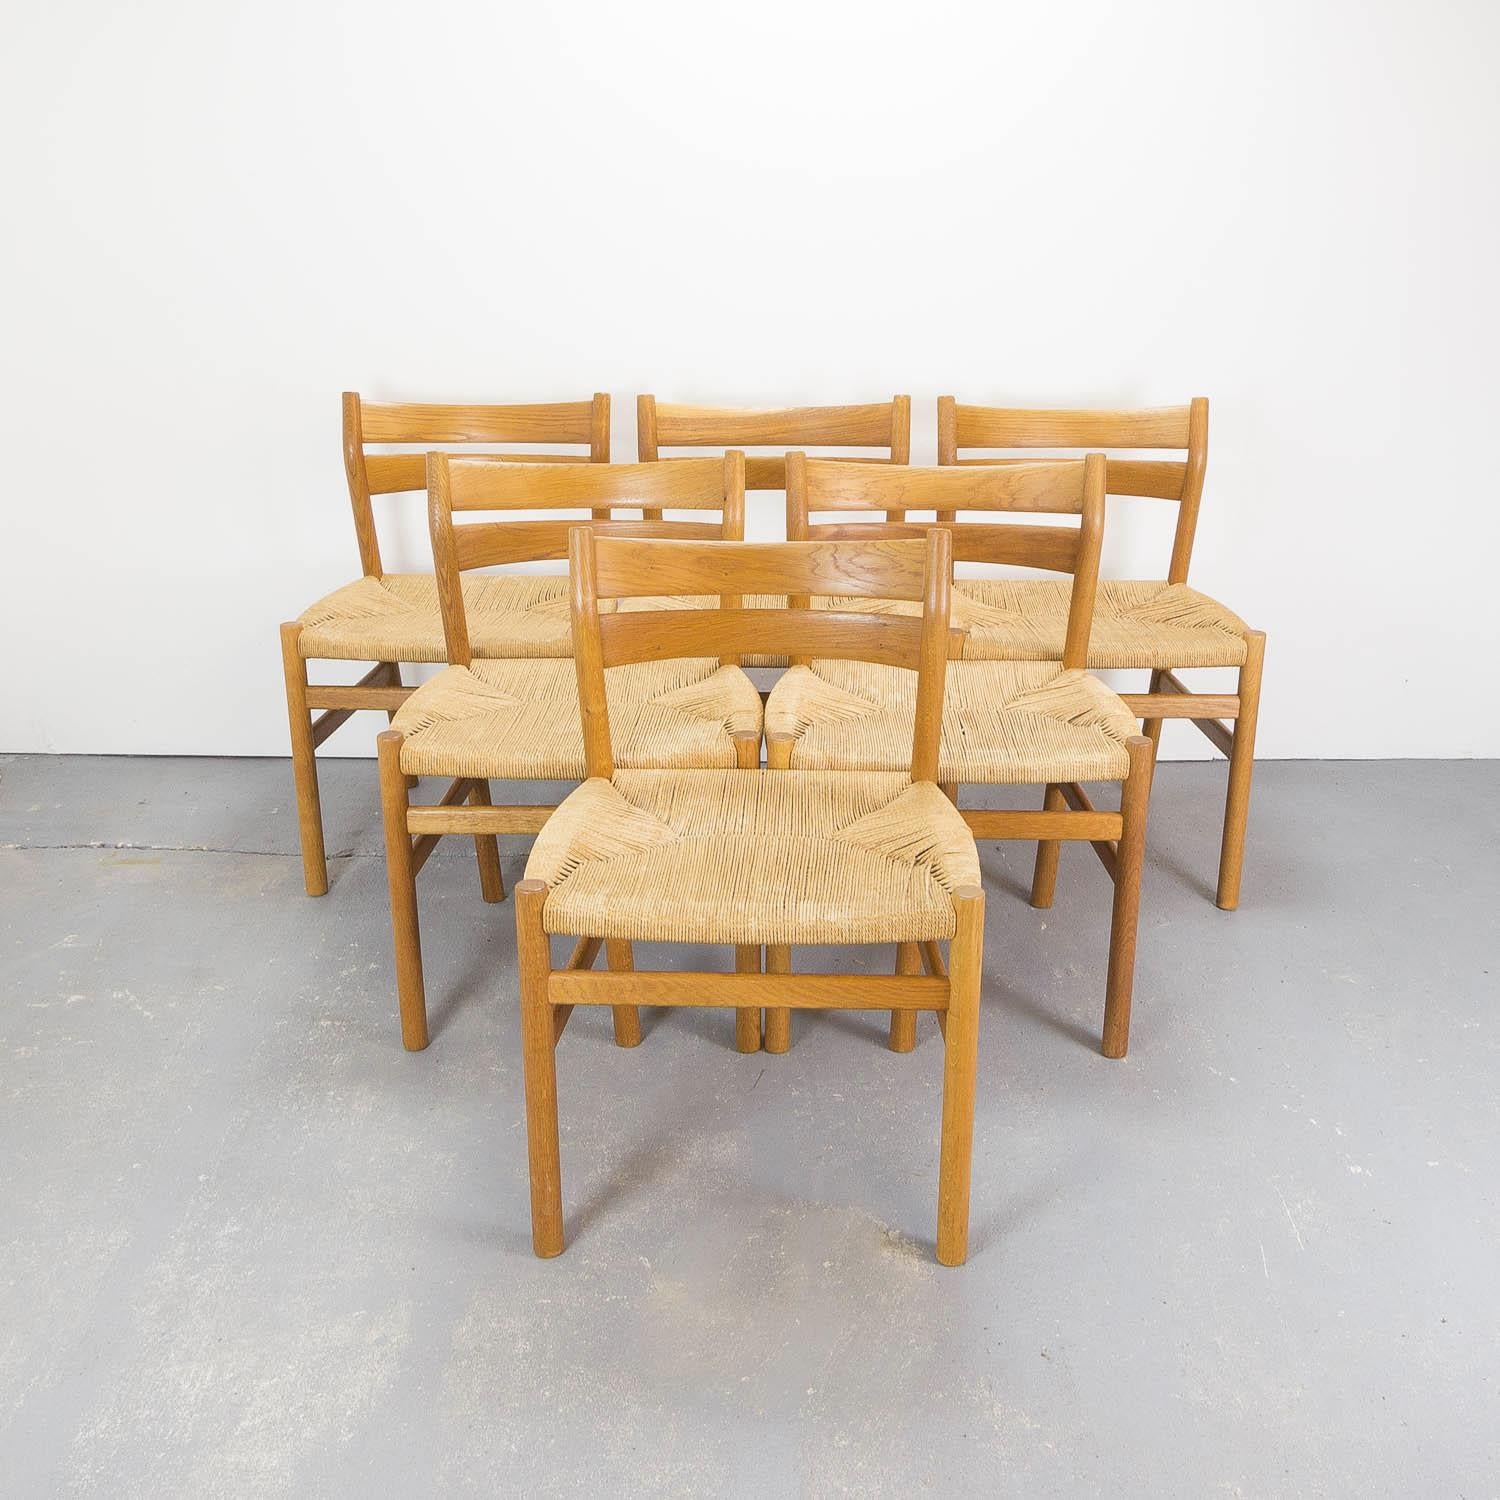 A set of 6 BM1 dining chairs in solid oak and original patinated paper cord by Børge Mogensen for C.M. Madsen, Denmark 1960s.